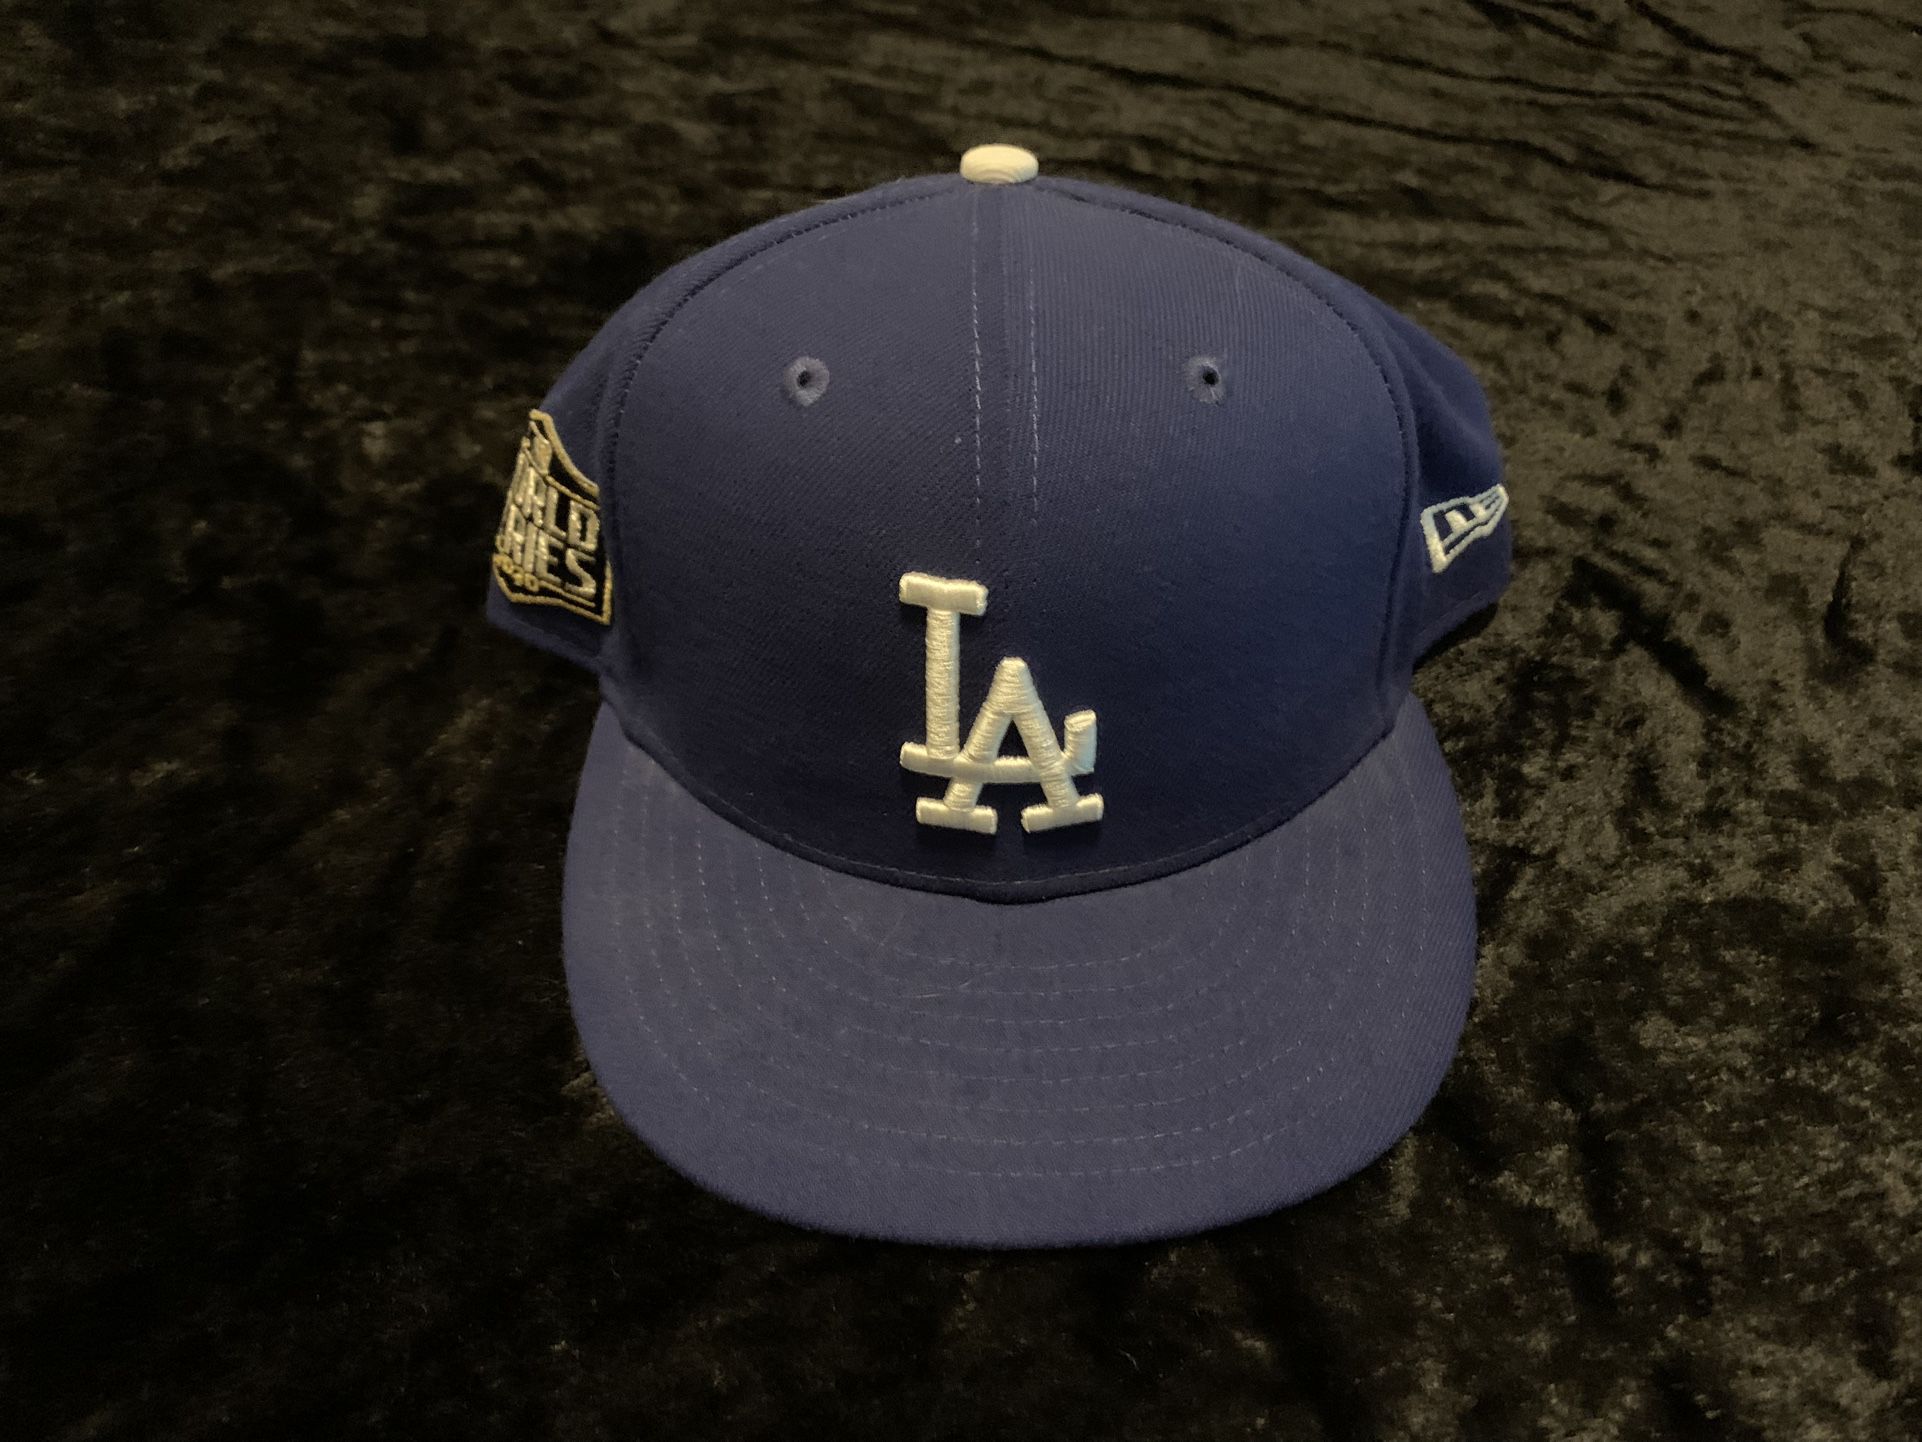 Los Angeles Dodgers 2020 Postseason World Series Championship 7 3/8 Fitted Hat